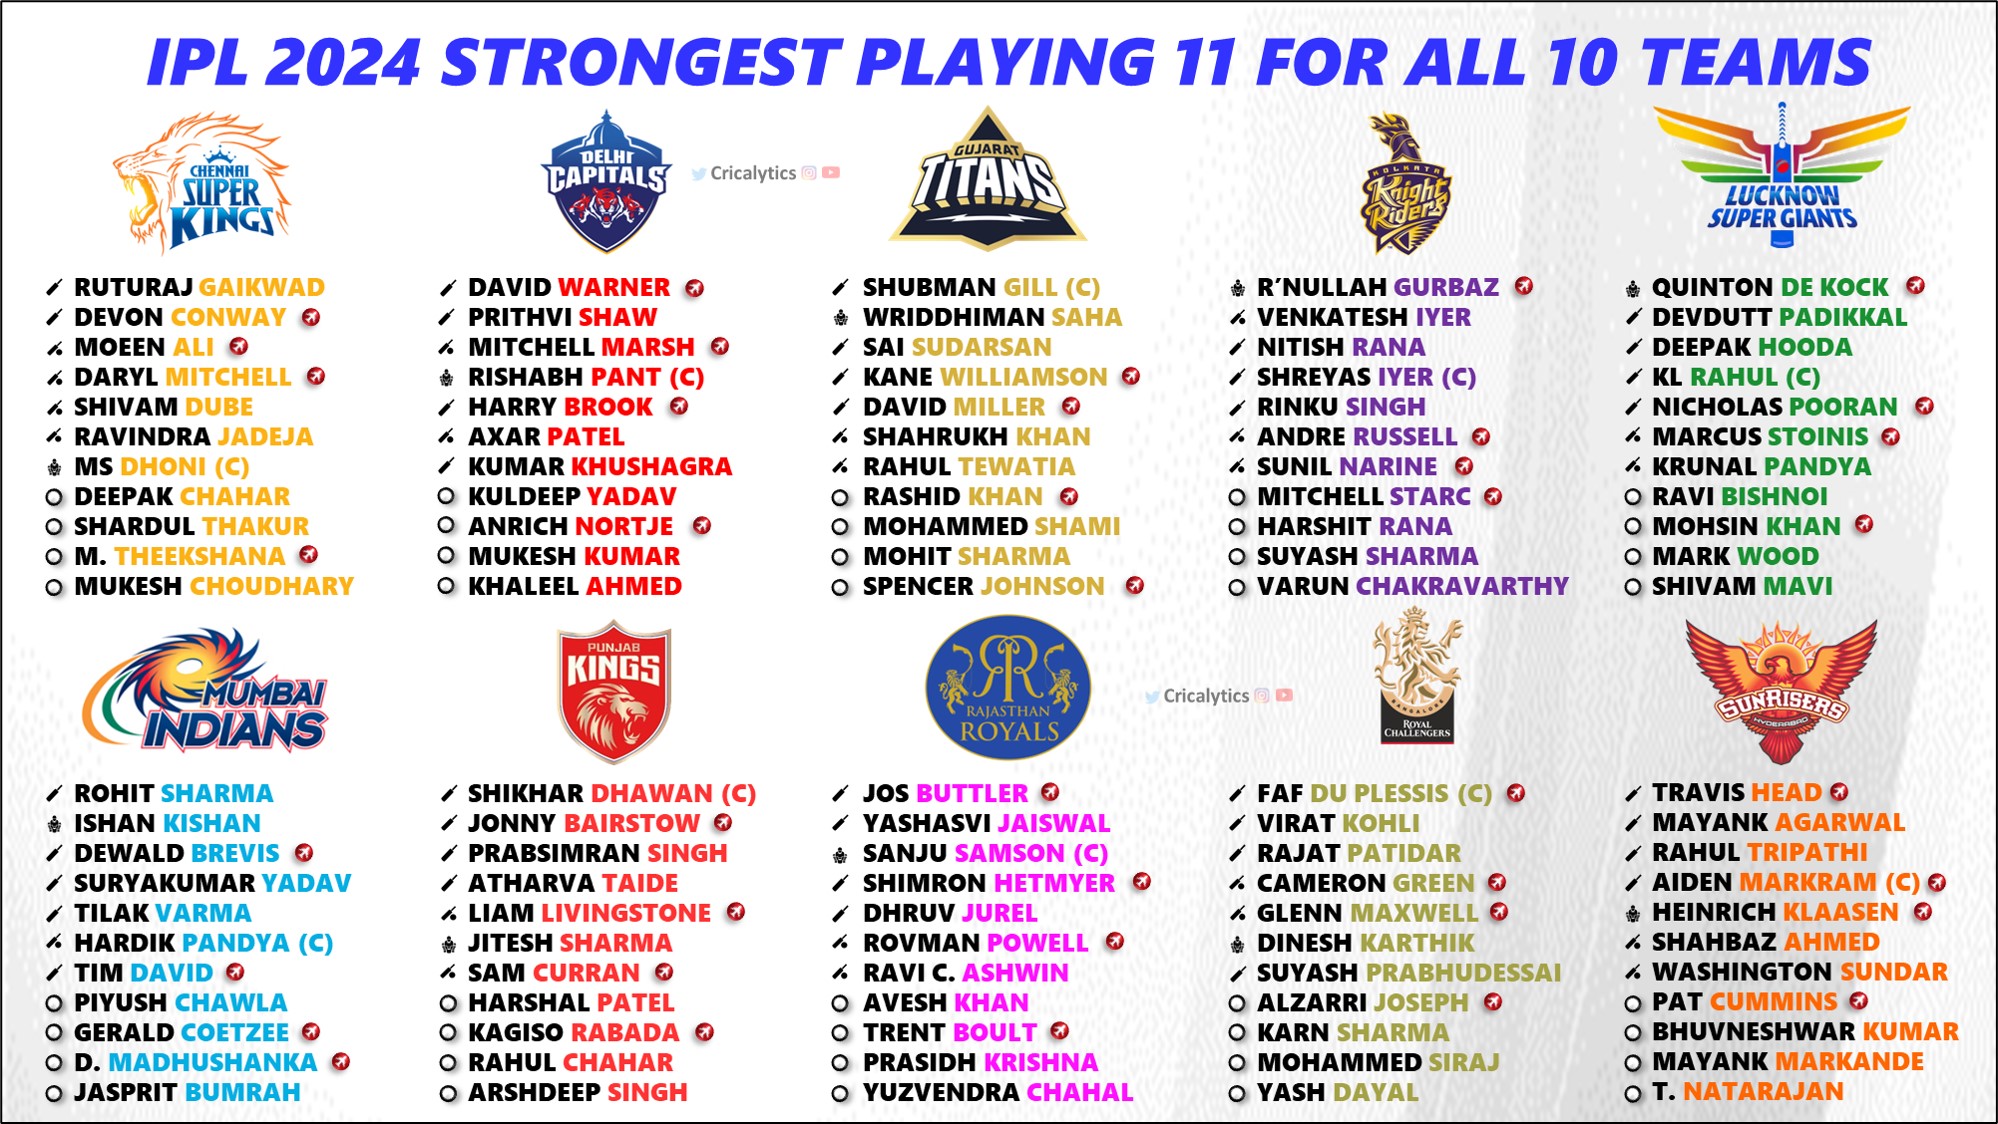 IPL 2024 Ranking the Powerhouse Playing 11 for All 10 Teams